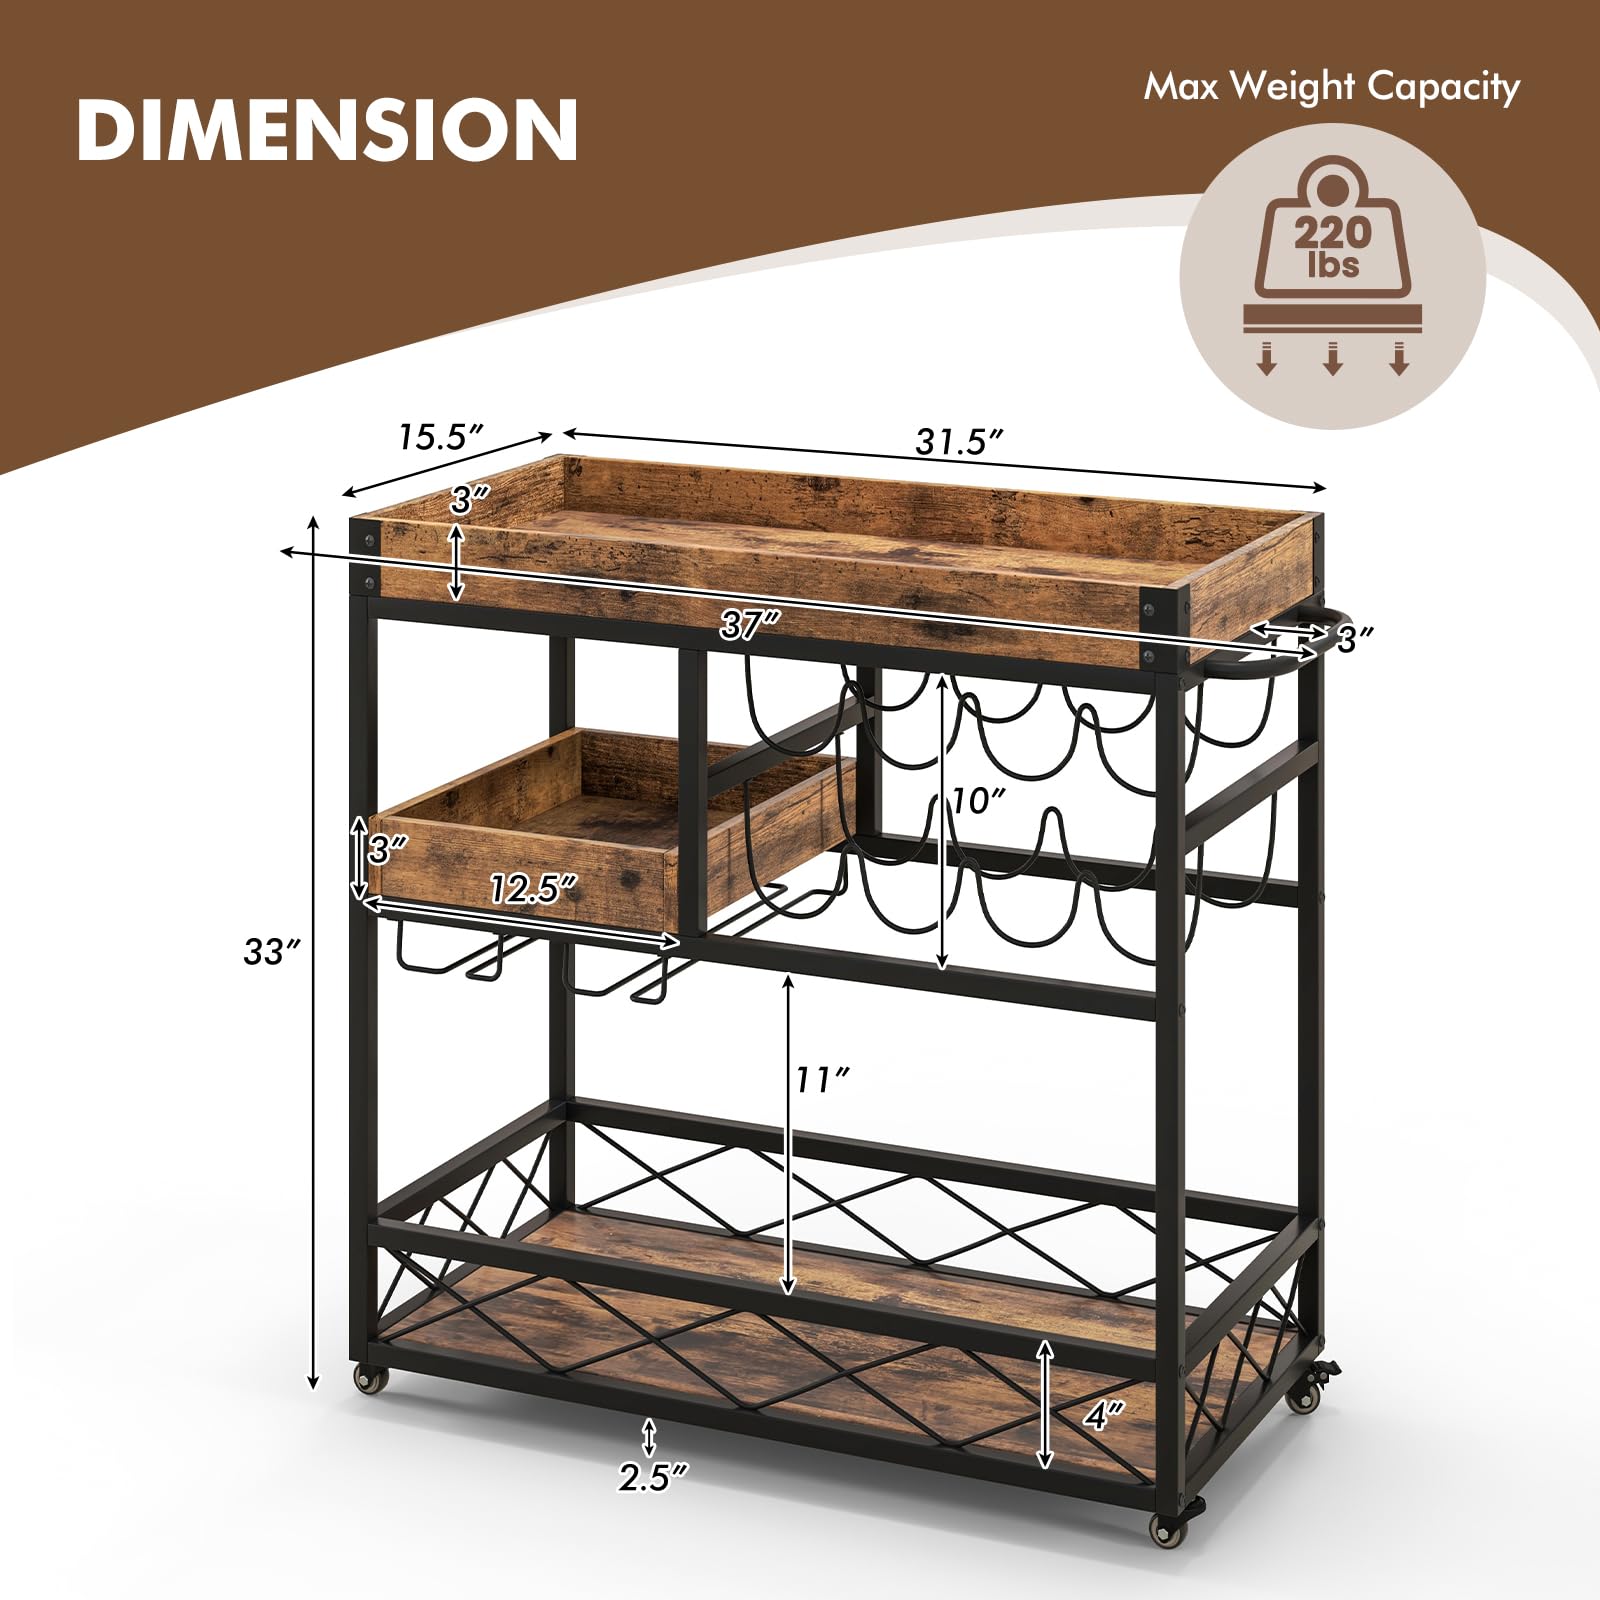 Giantex Home Bar Serving Cart, 3-Tier Rolling Bar Cart with Removable Tray, Wine Rack & Glass Holder, Rustic Brown